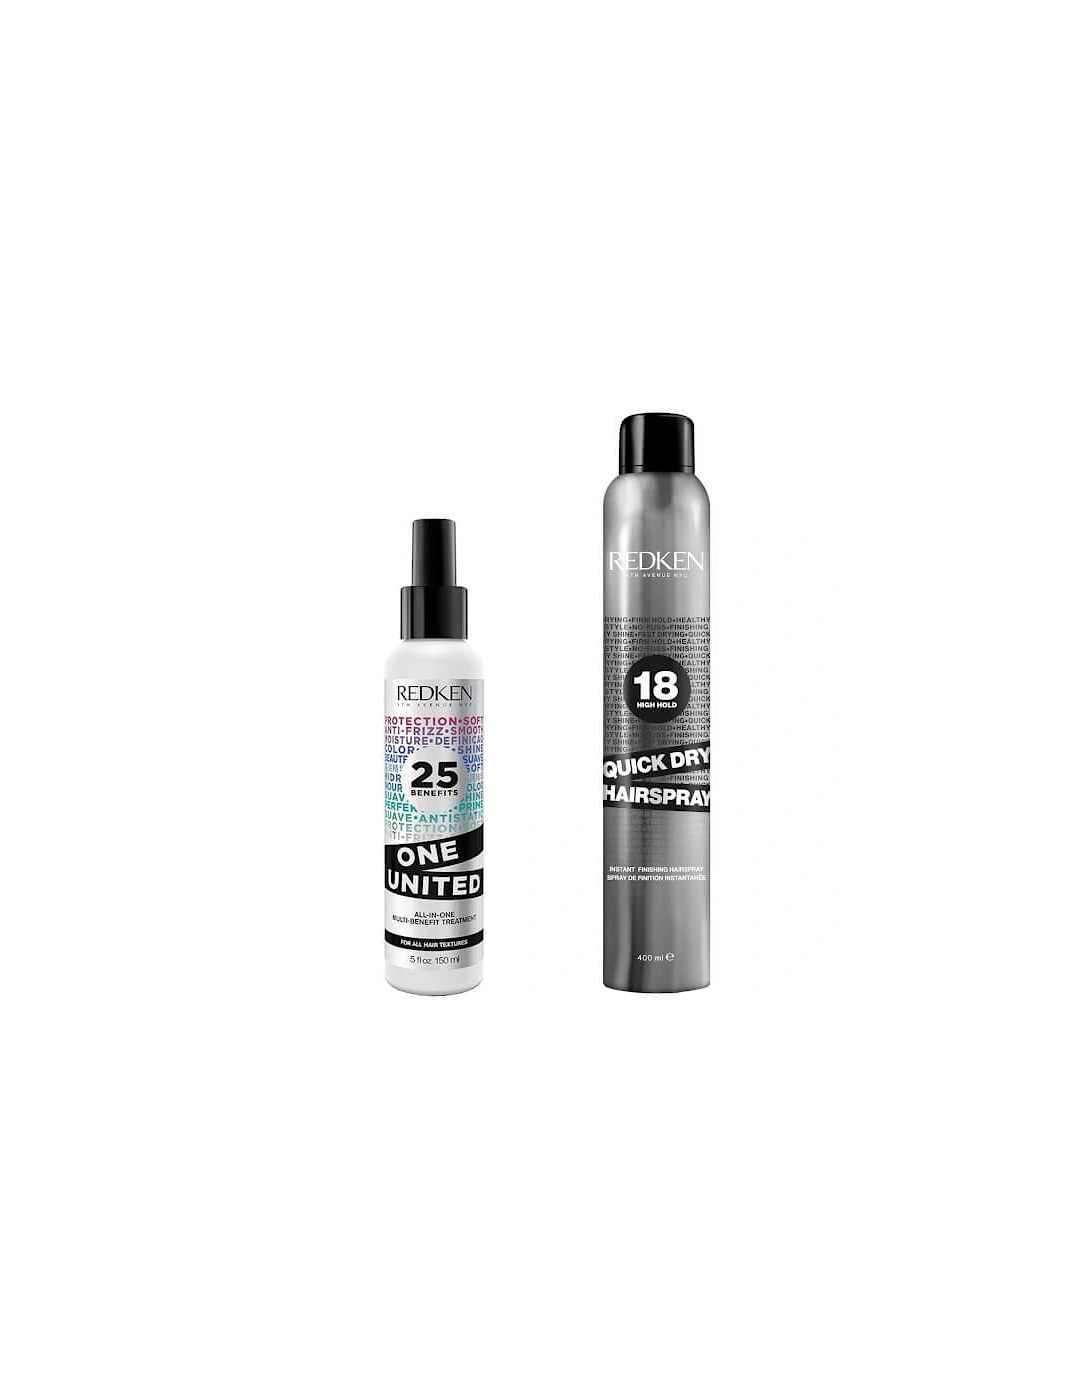 Styling One United and Quick Dry Hair Spray Bundle, 2 of 1